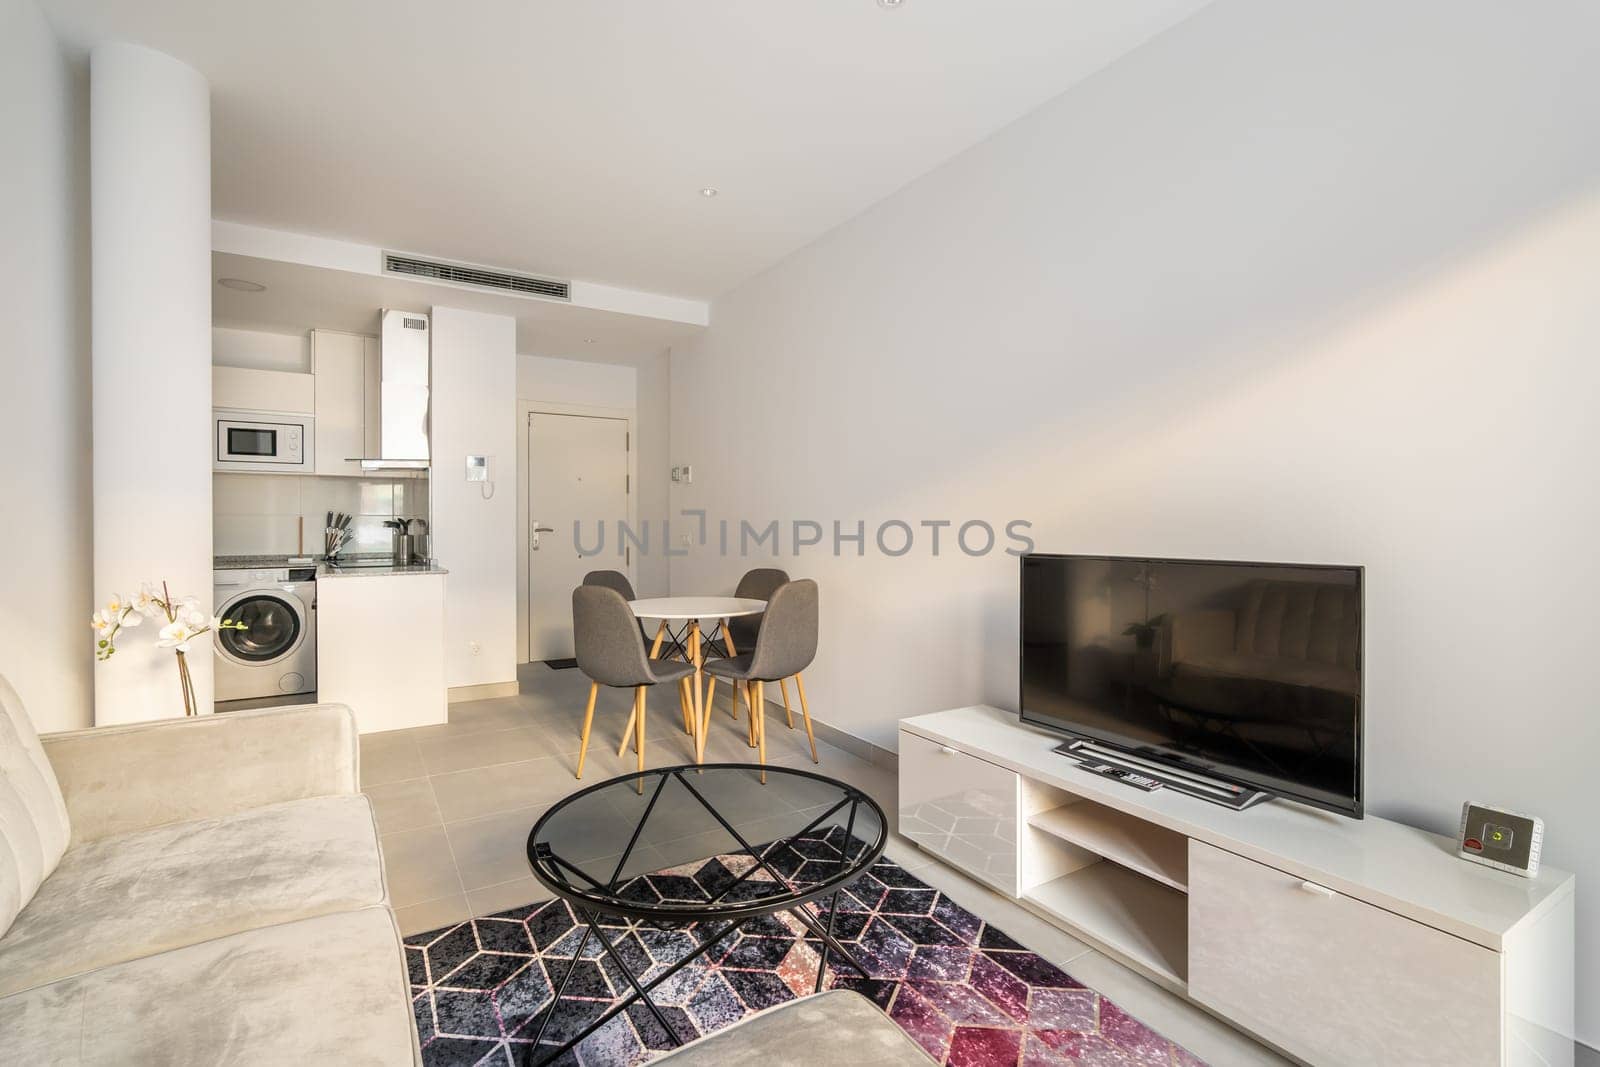 Studio apartment with a combined kitchen and living room with a corner sofa, tables and chairs and a TV with a picture on the background of a kitchen set and a hallway.